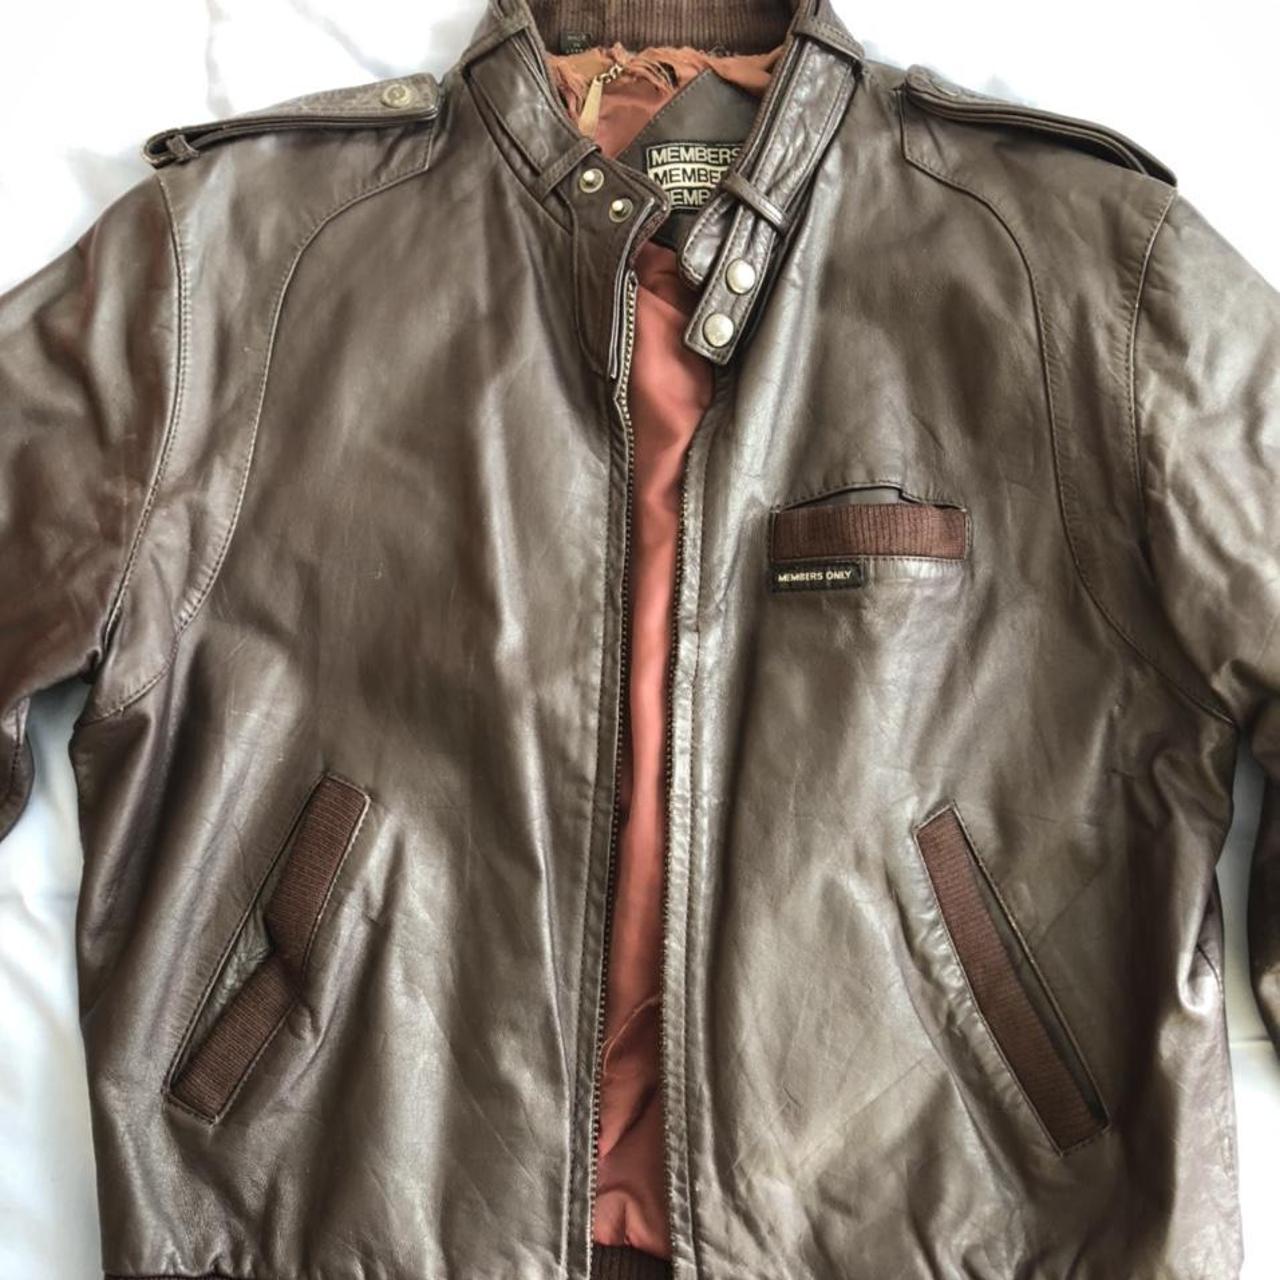 Product Image 1 - Brown leather vintage members only